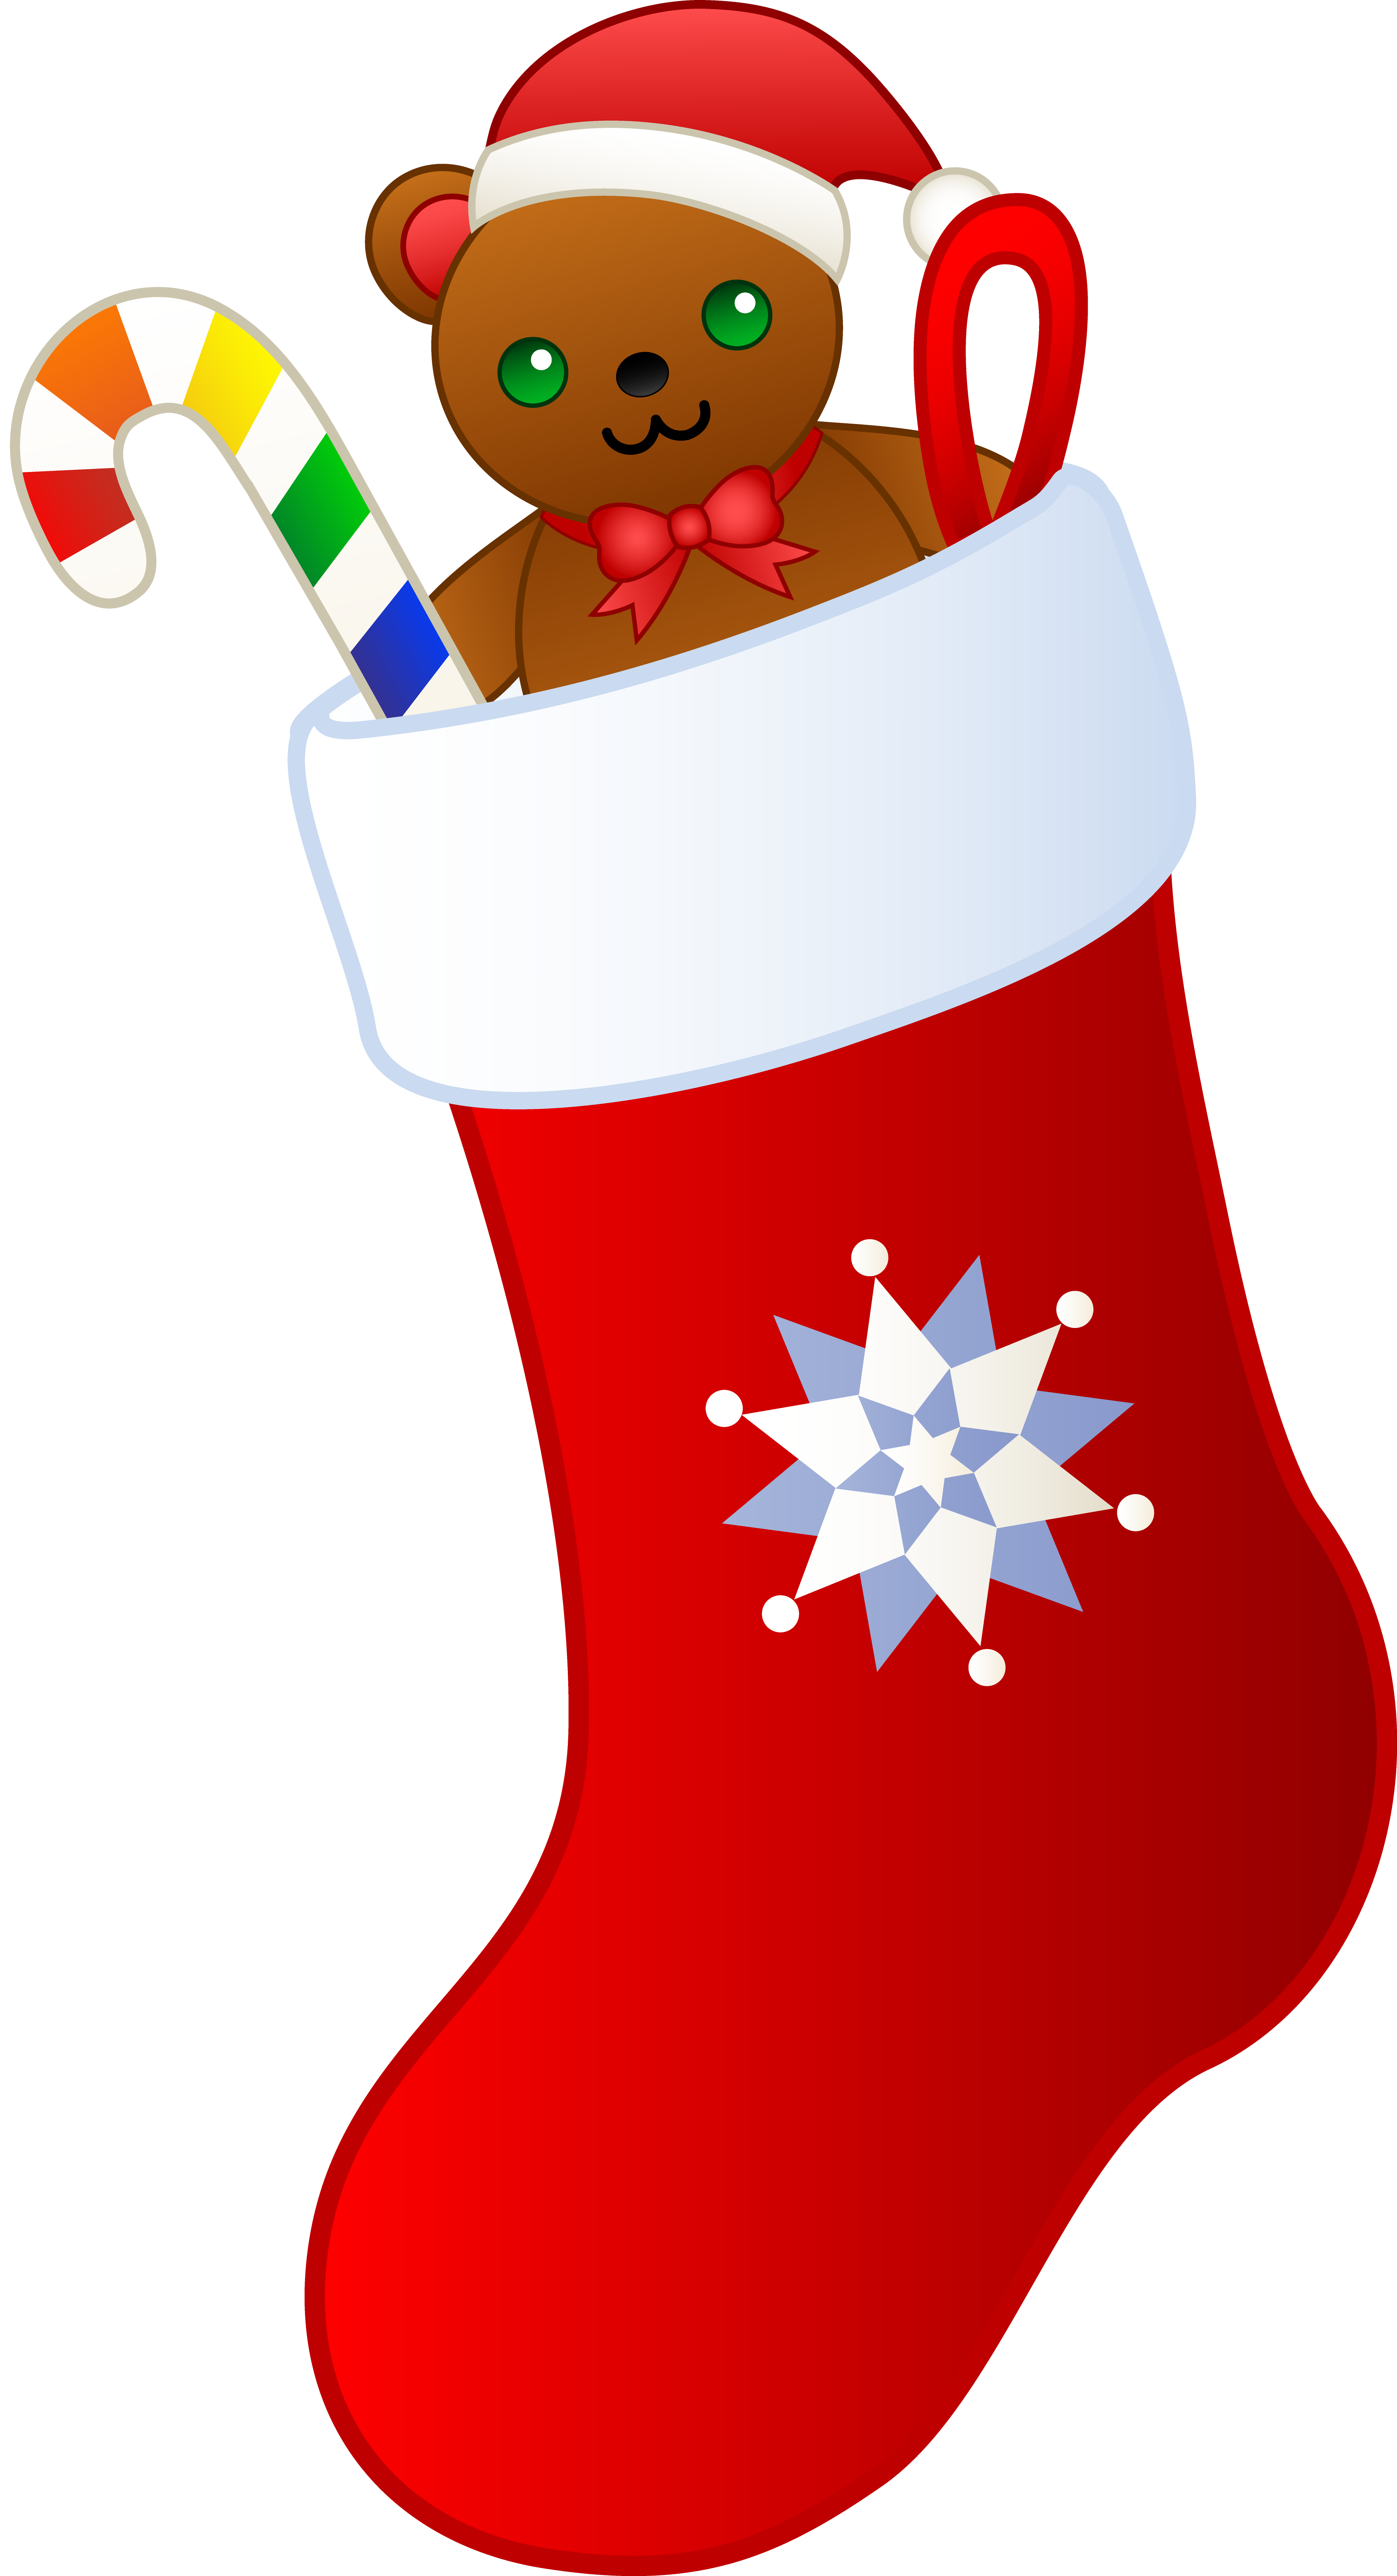 Picture Of A Stocking 5